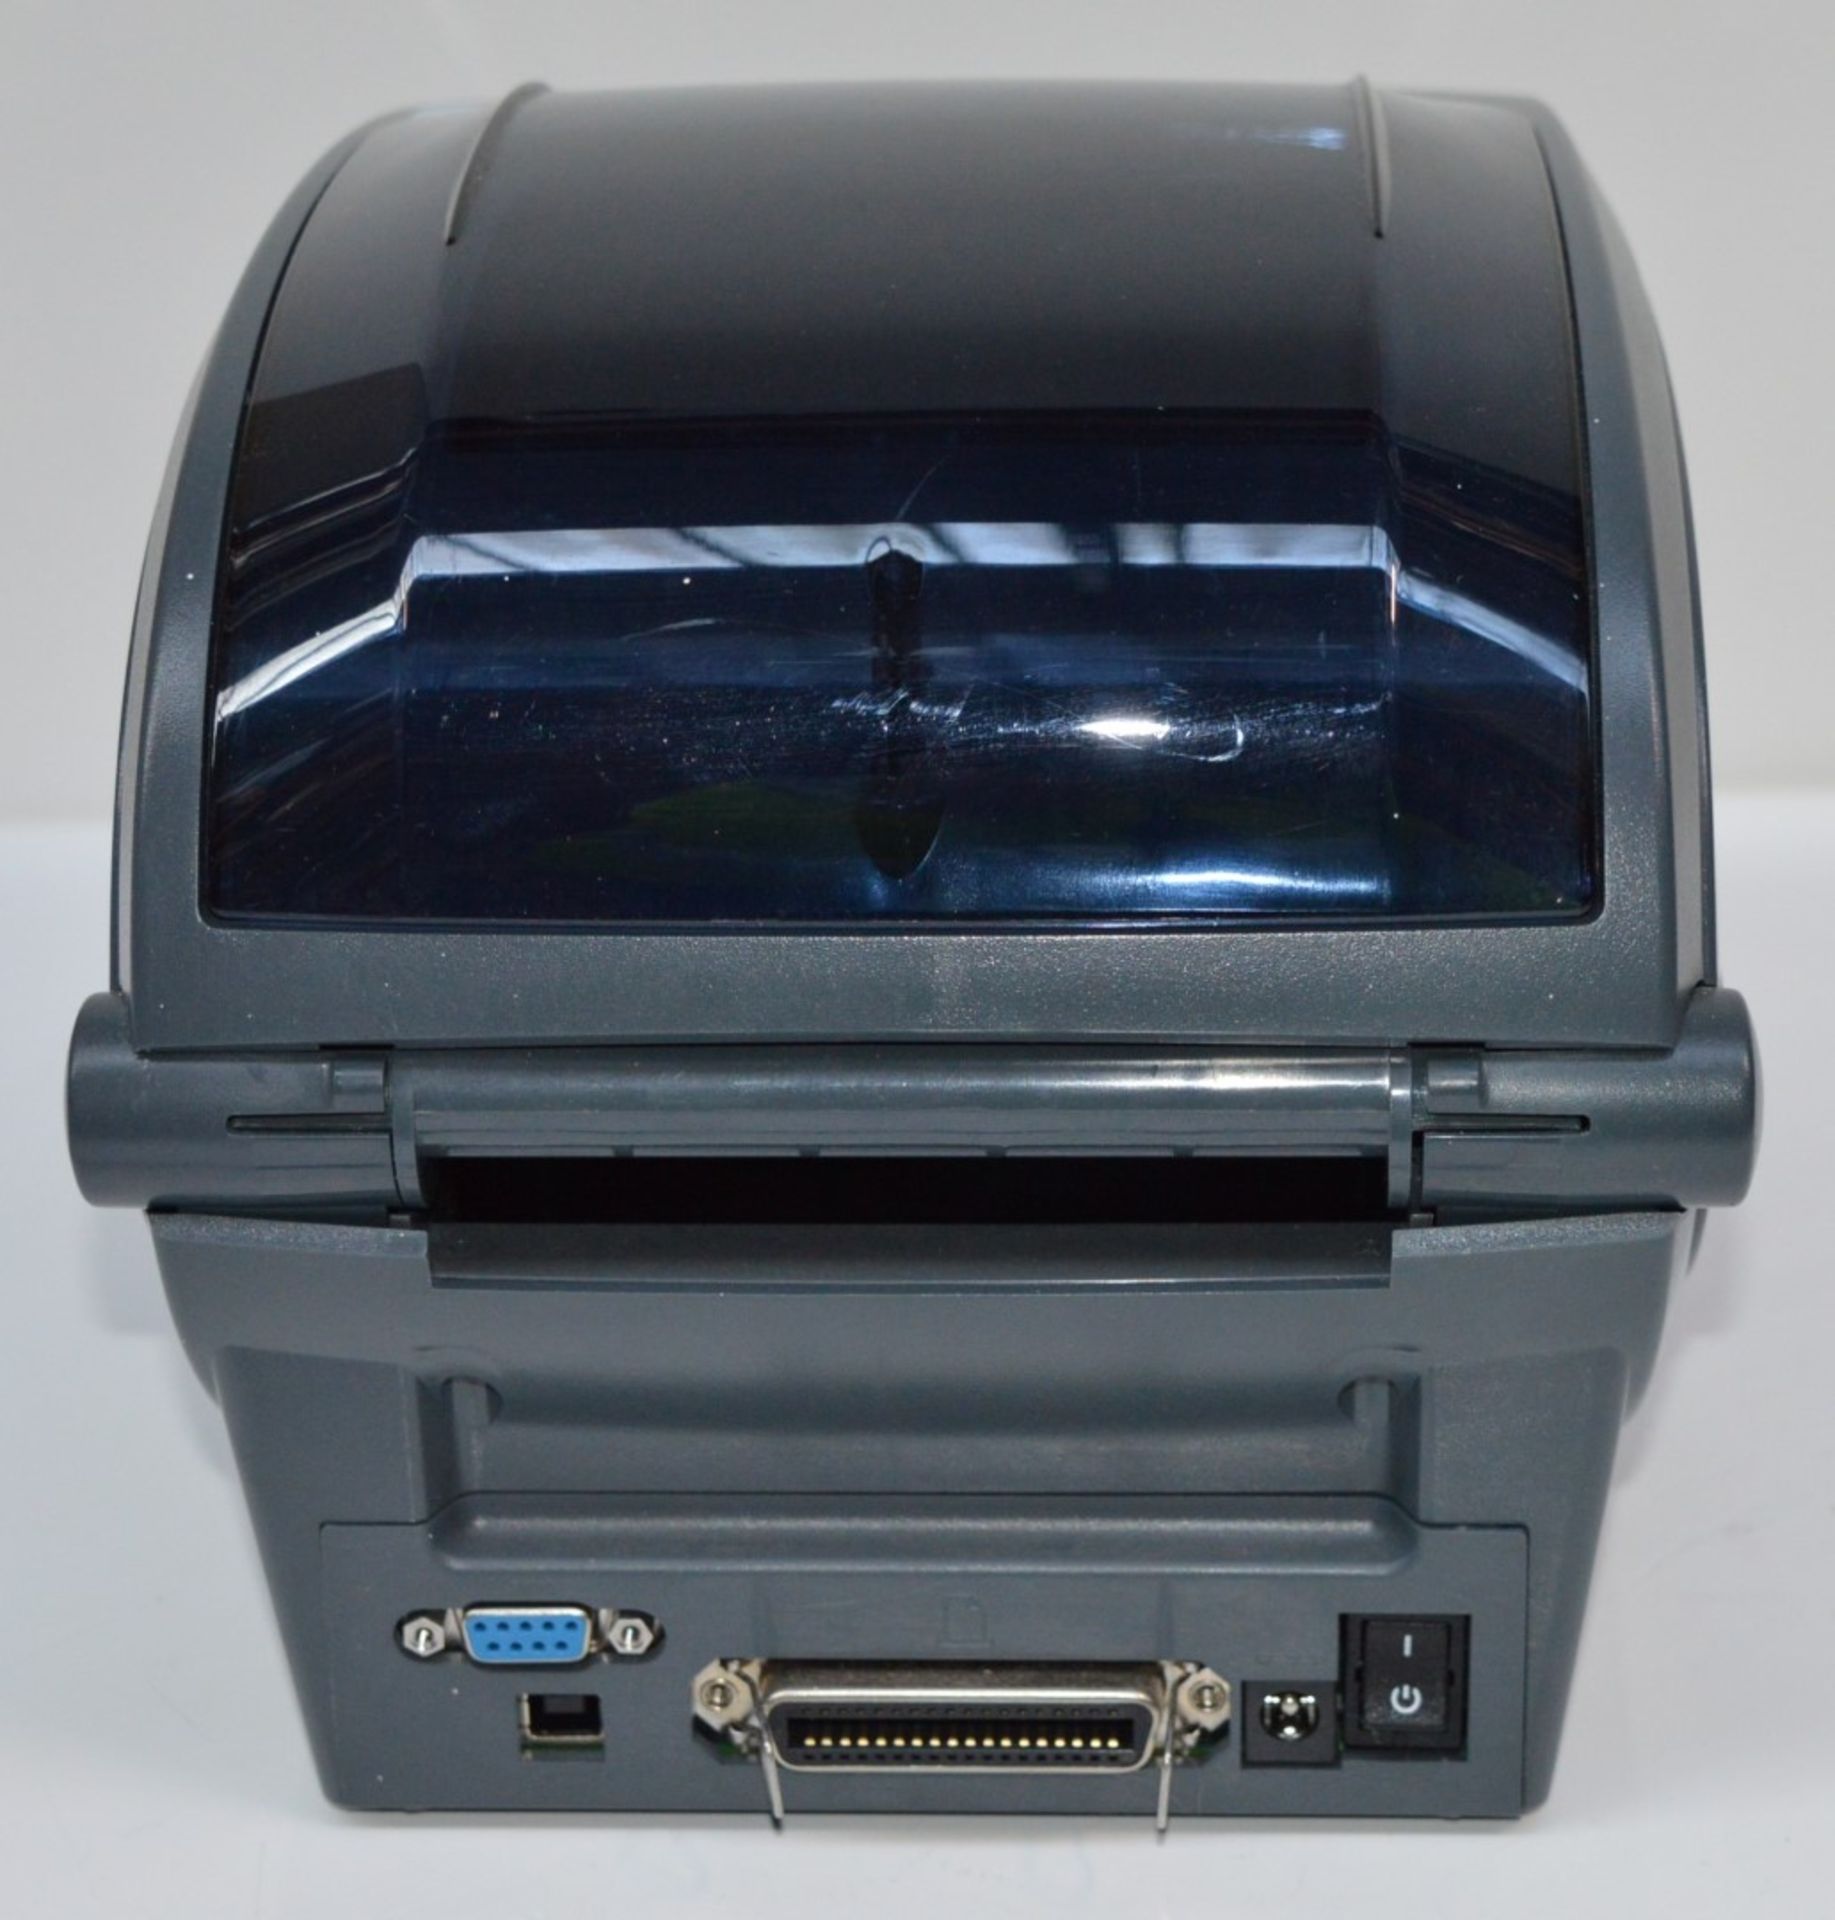 1 x Zebra GK420t Thermal Transfer Label Printer - USB & Serial Connectivity - Includes Cables - - Image 7 of 10